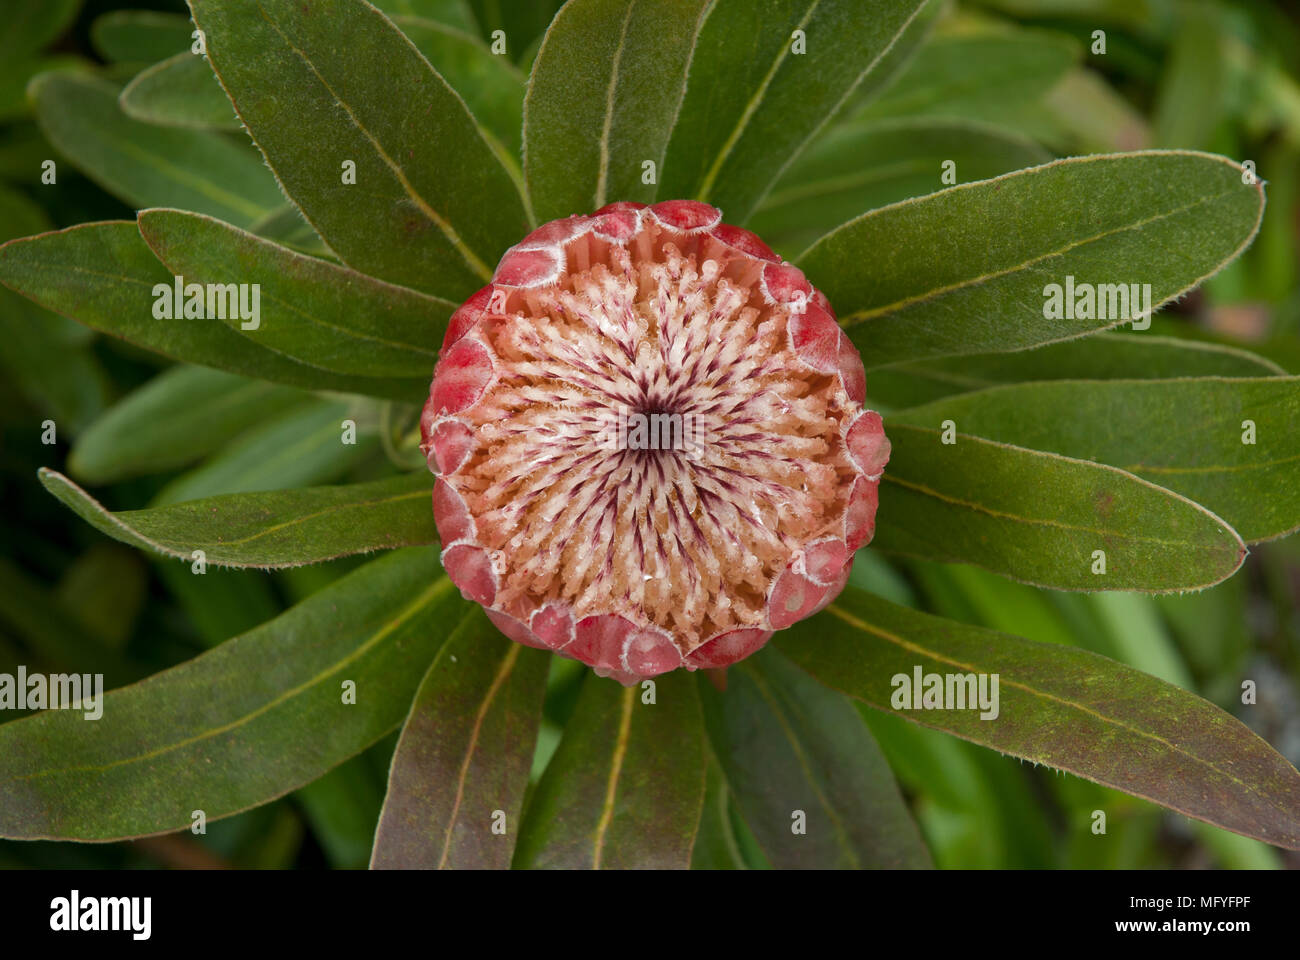 The large flower of Protea Eximia 'Pink Ice' about to open. Stock Photo